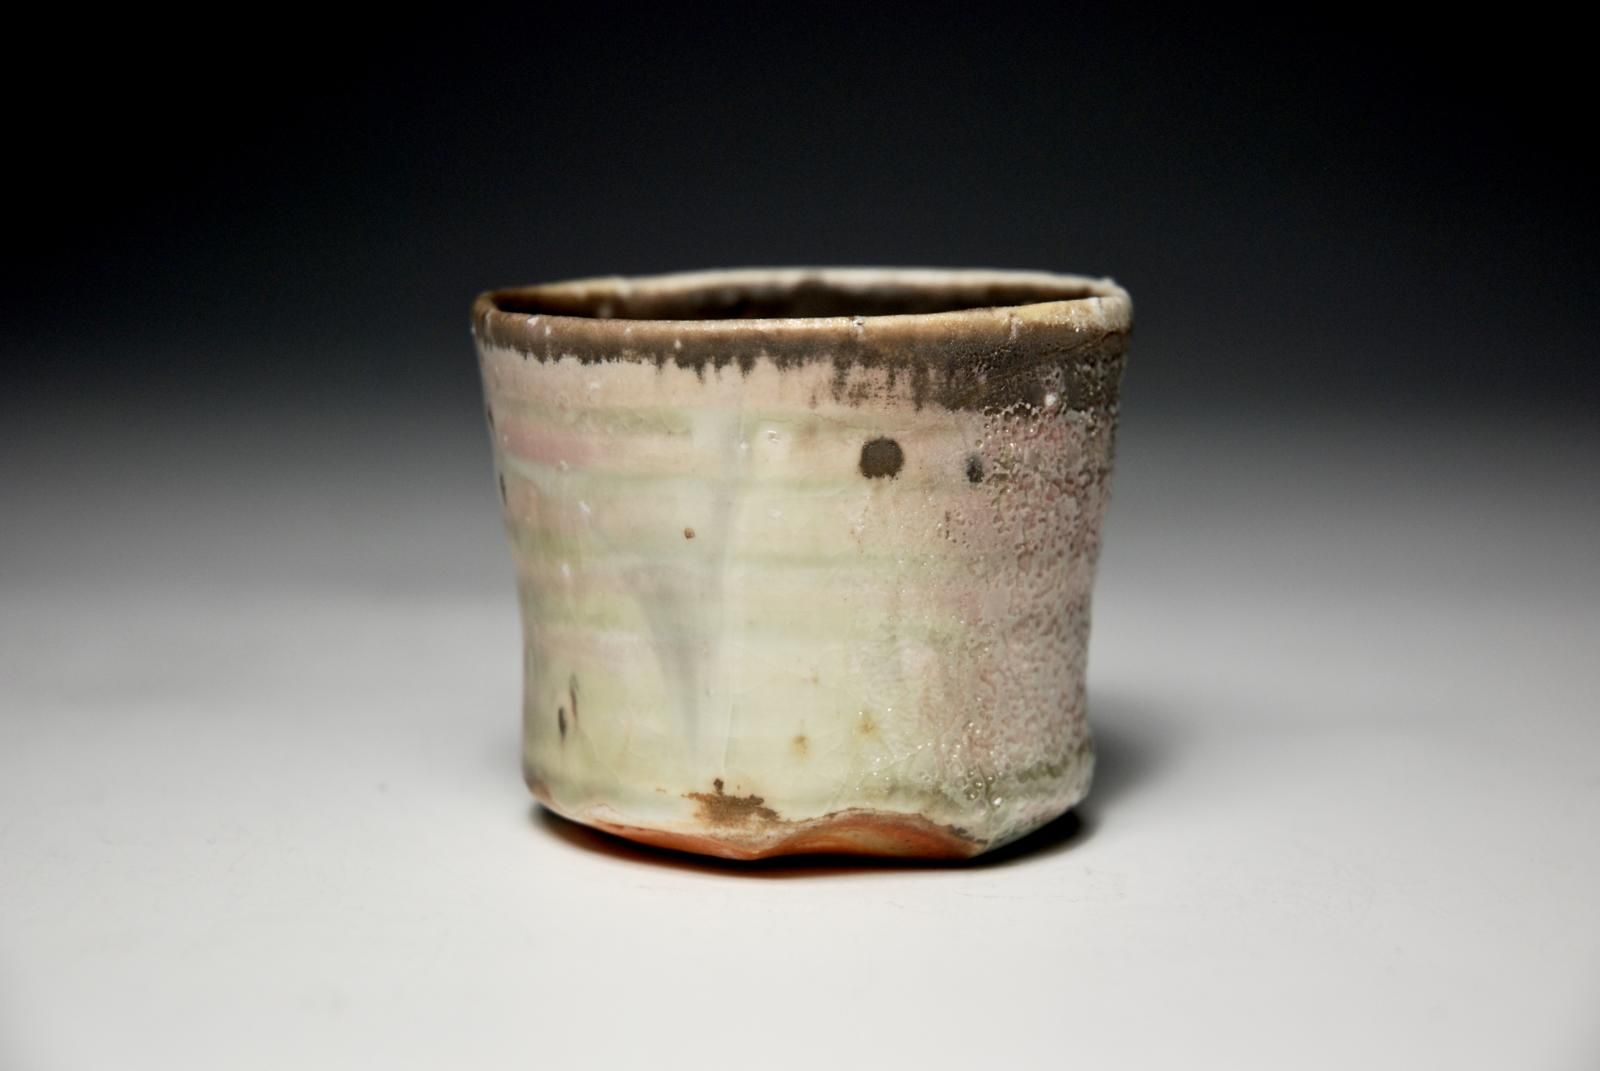 Petit Cup.  Individual Slow Thrown with Hand Trimmed Foot.  Porcelain with Locally SOurced Indigenous Rock Grits.  Celadon Glaze. by Sim Taylor